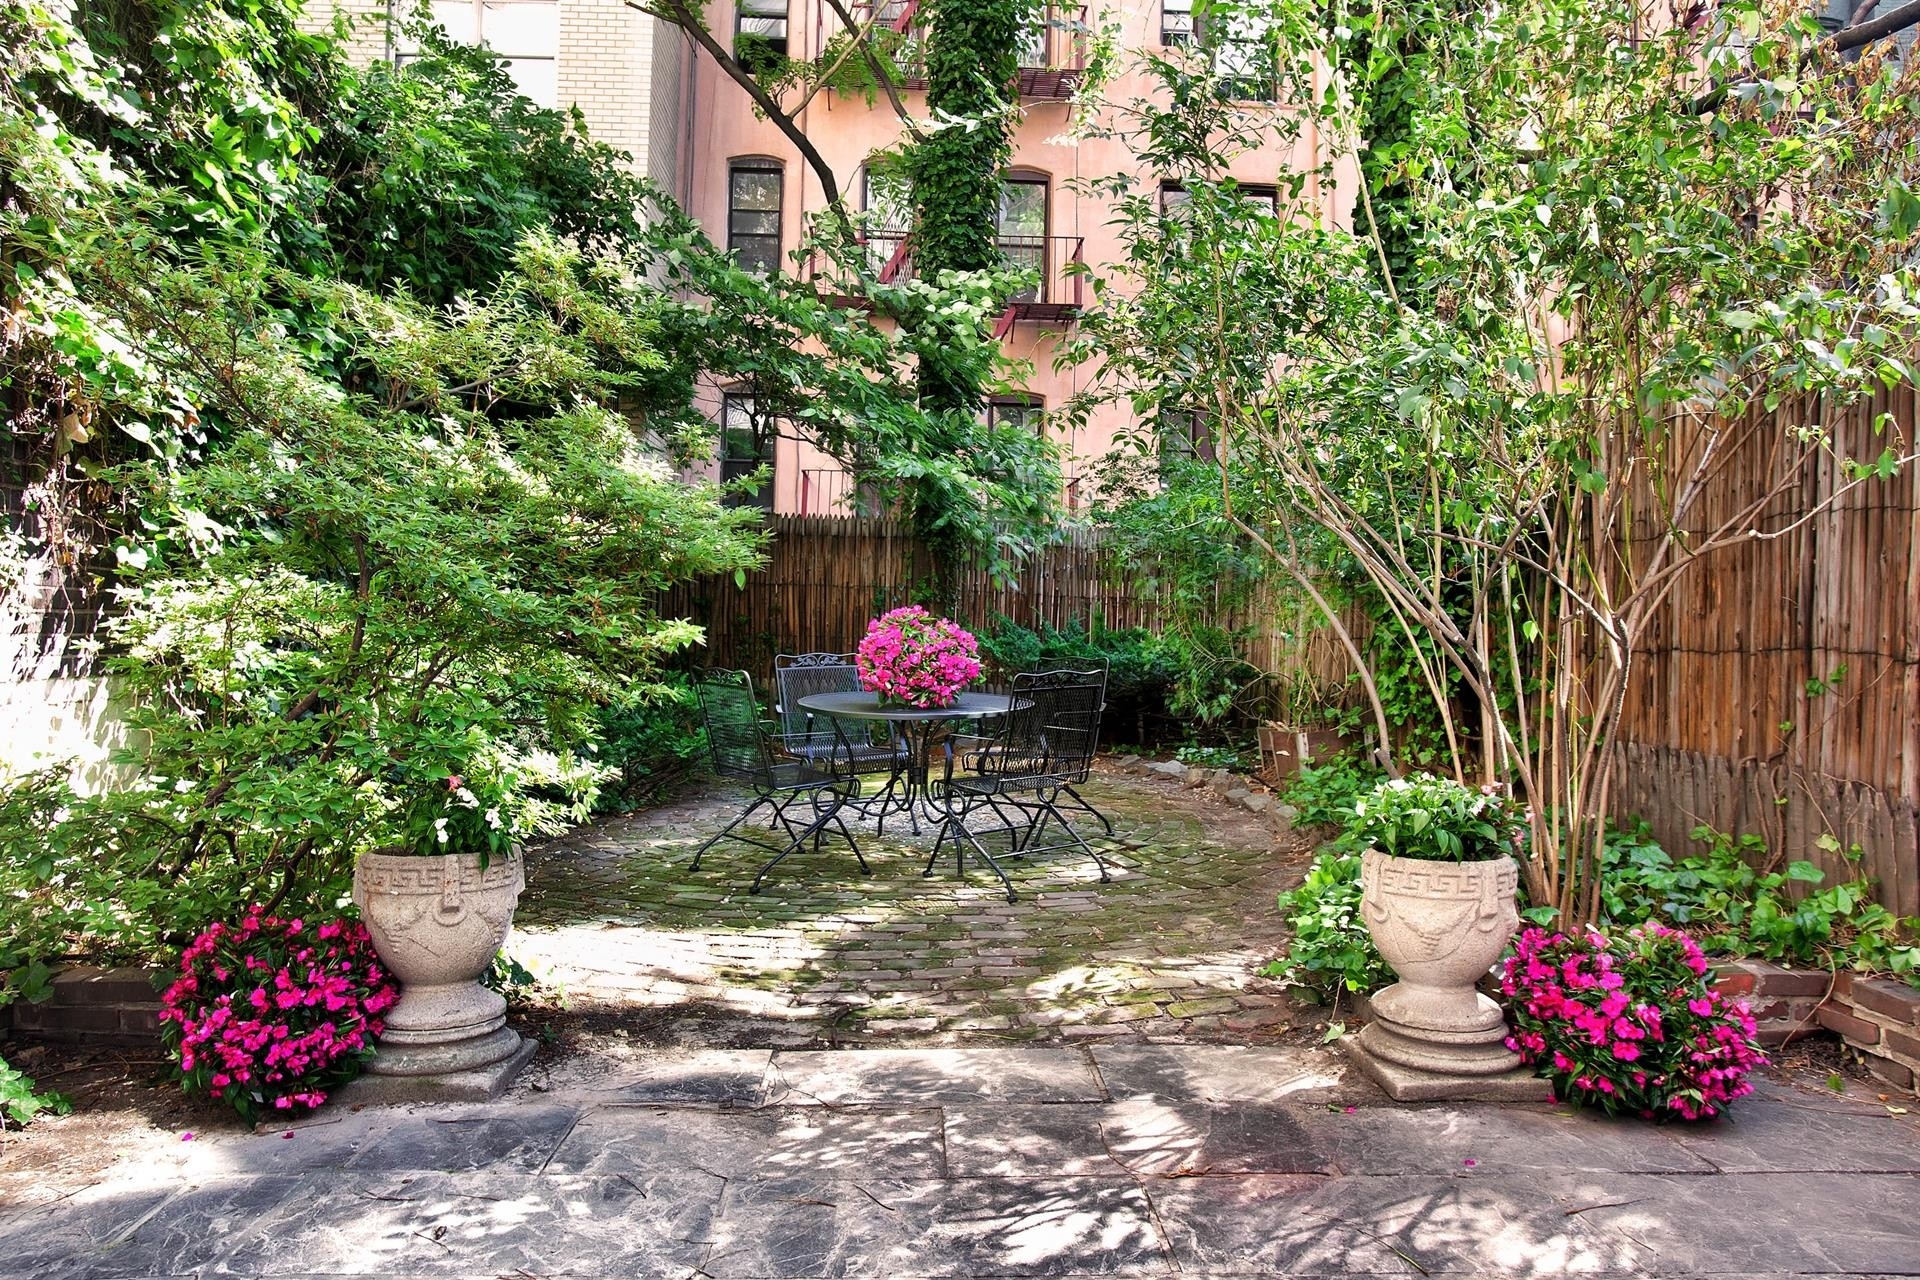 Property at 350 E 84TH ST, TOWNHOUSE Yorkville, New York, New York 10028